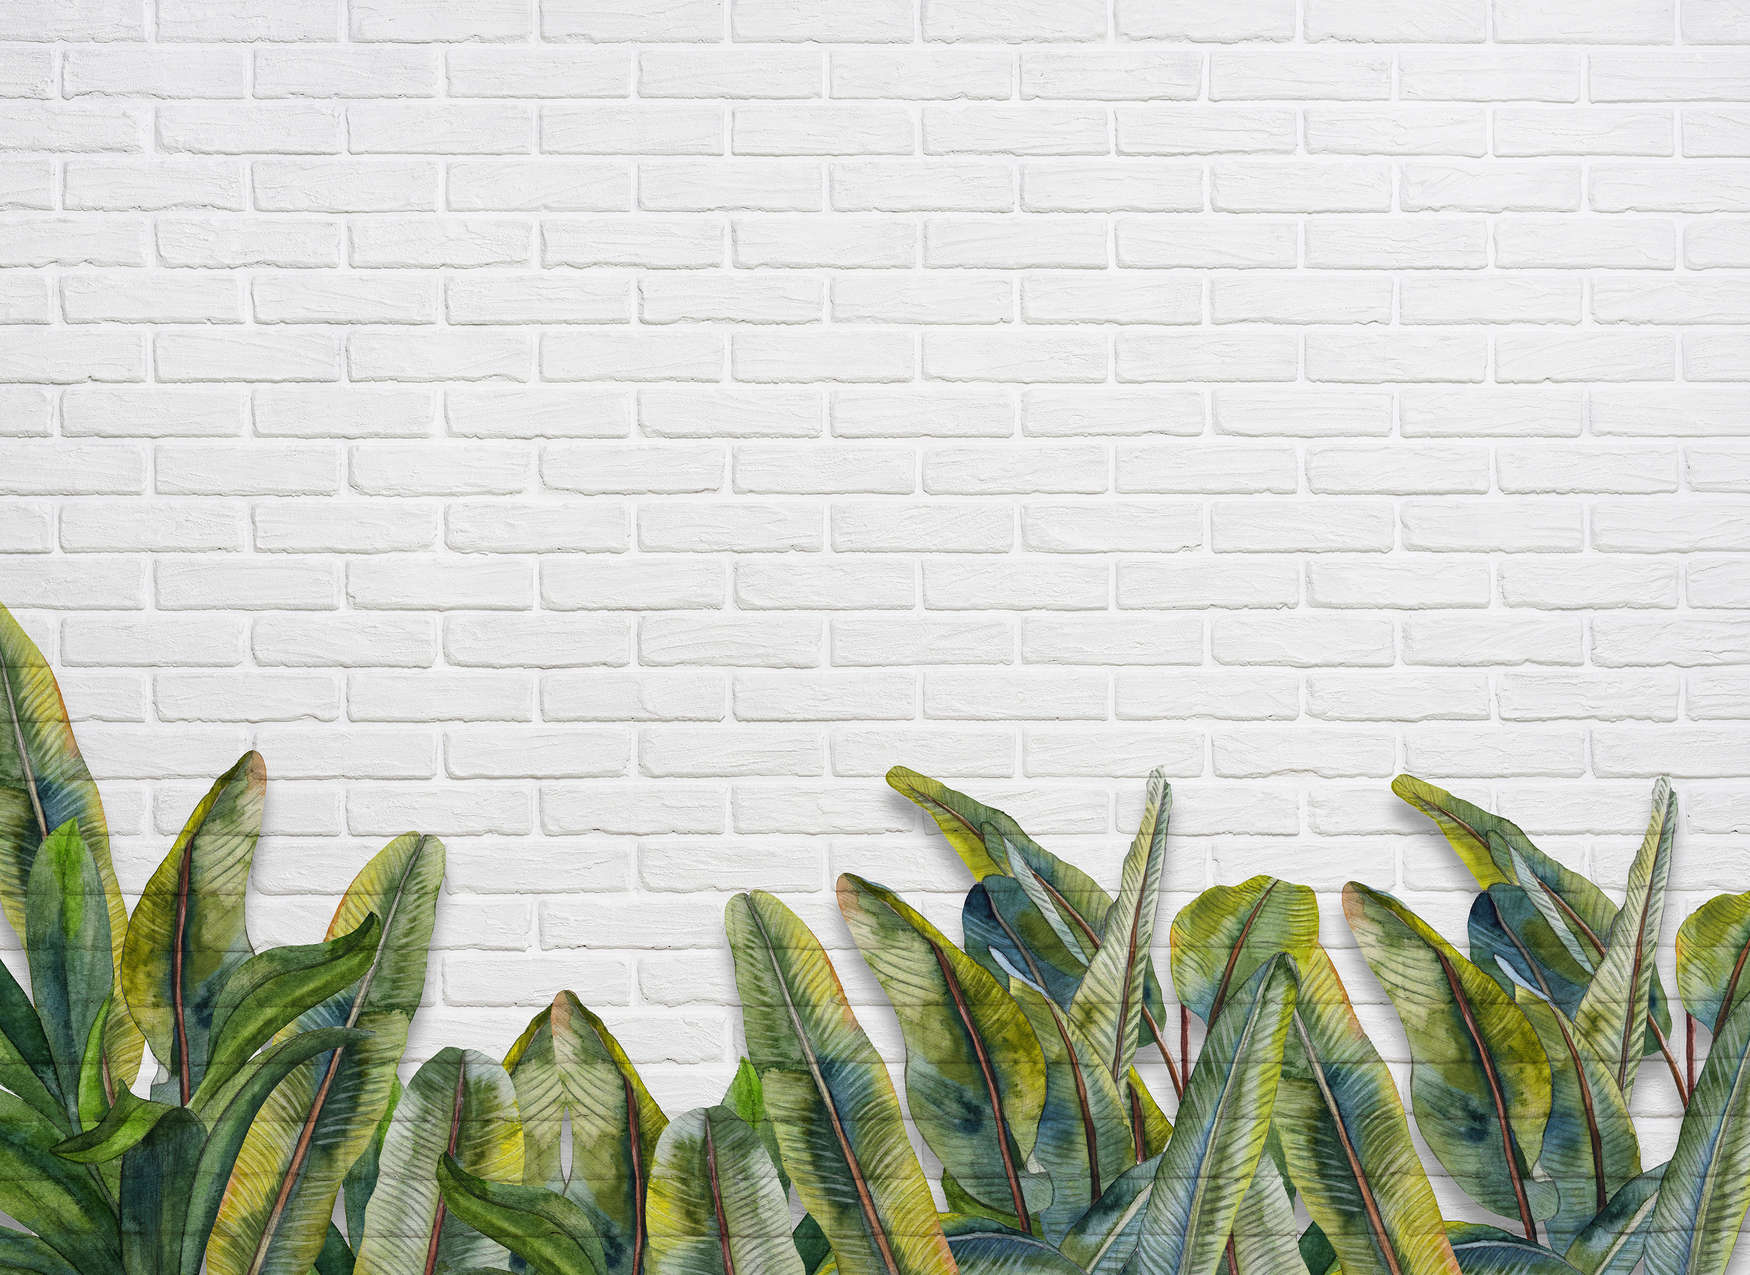             Photo wallpaper with leaves in front of a white brick wall - Green, White
        